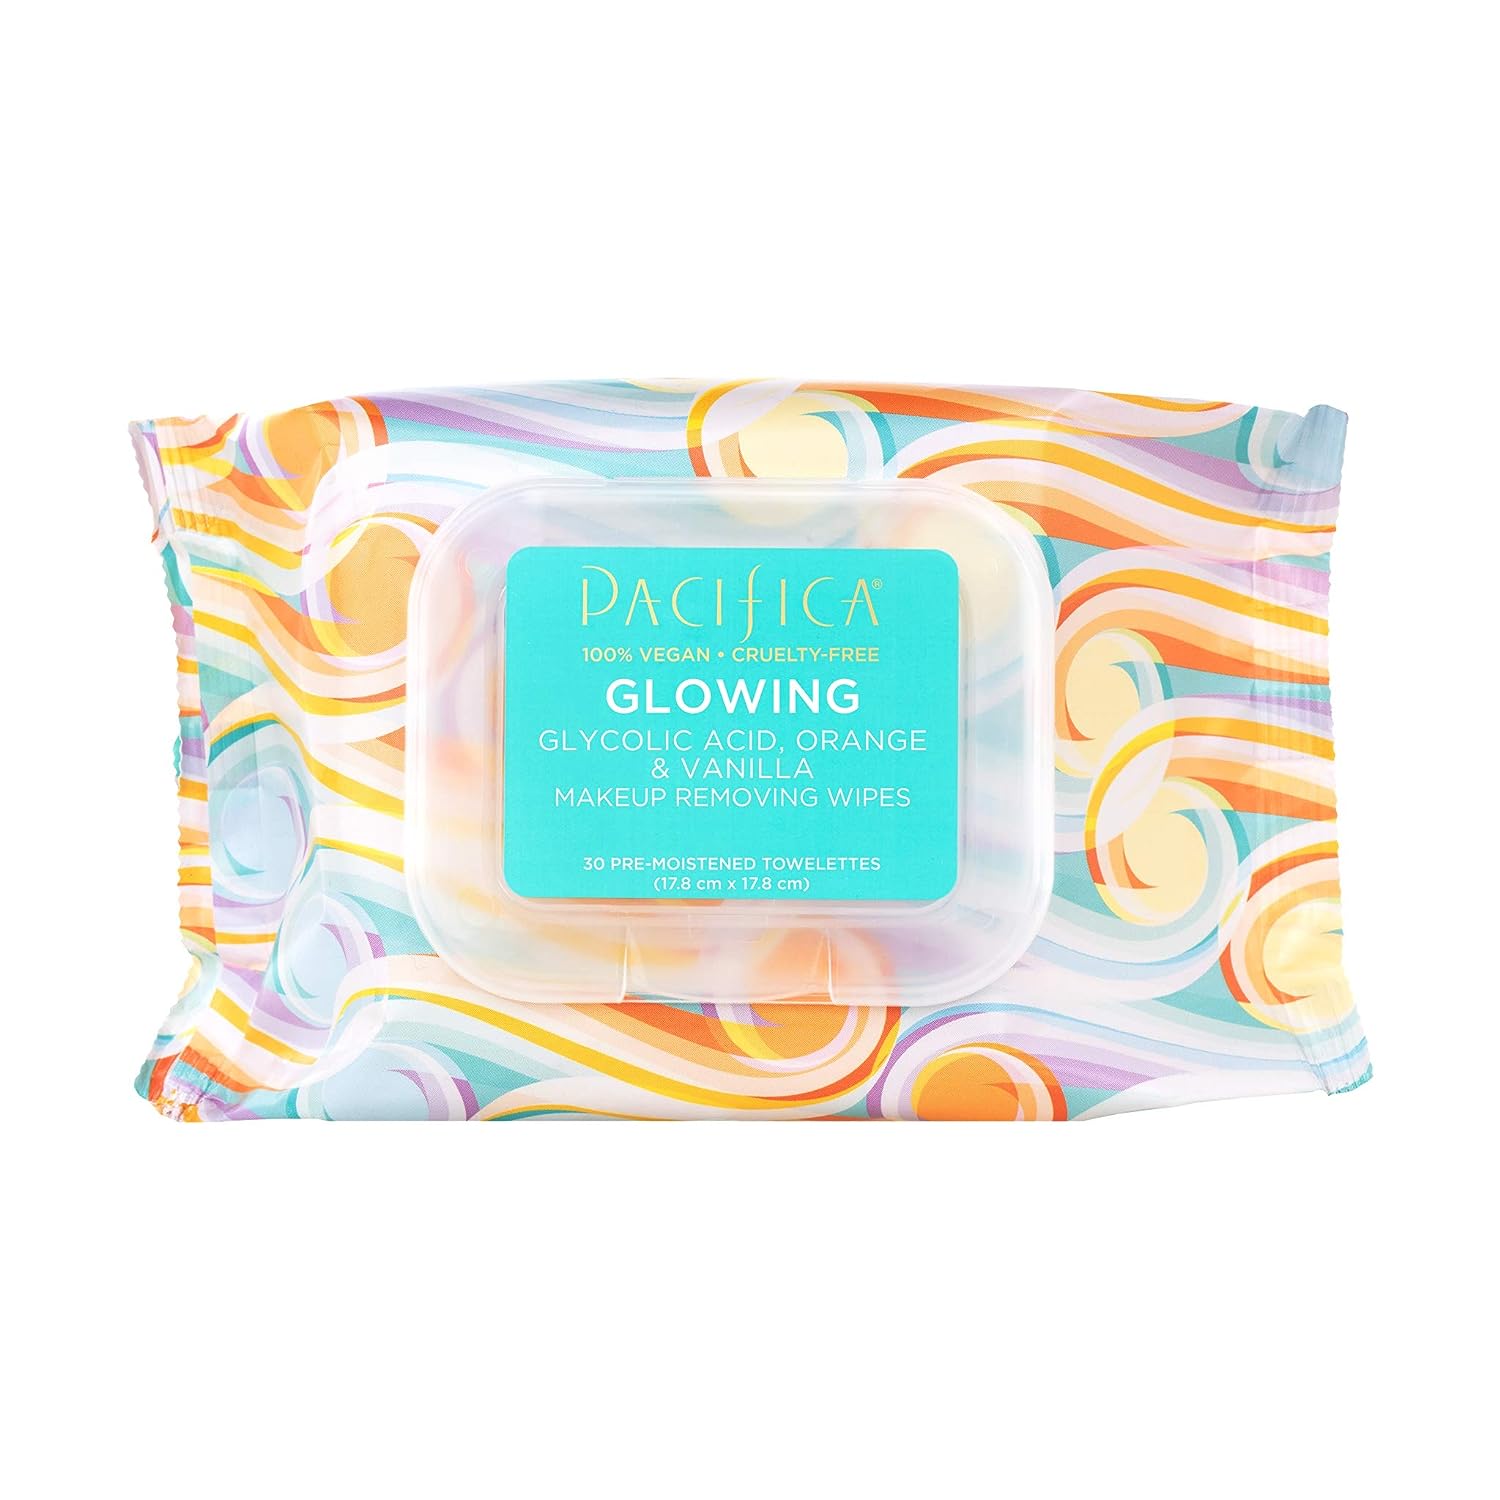 Pacifica Beauty, Glowing Makeup Remover Wipes, Glycolic Acid, Coconut Water, Aloe Infused, Daily Cleansing, Exfoliating, Clean Skin Care, Plant Fiber Facial Towelettes, Vegan & Cruelty Free